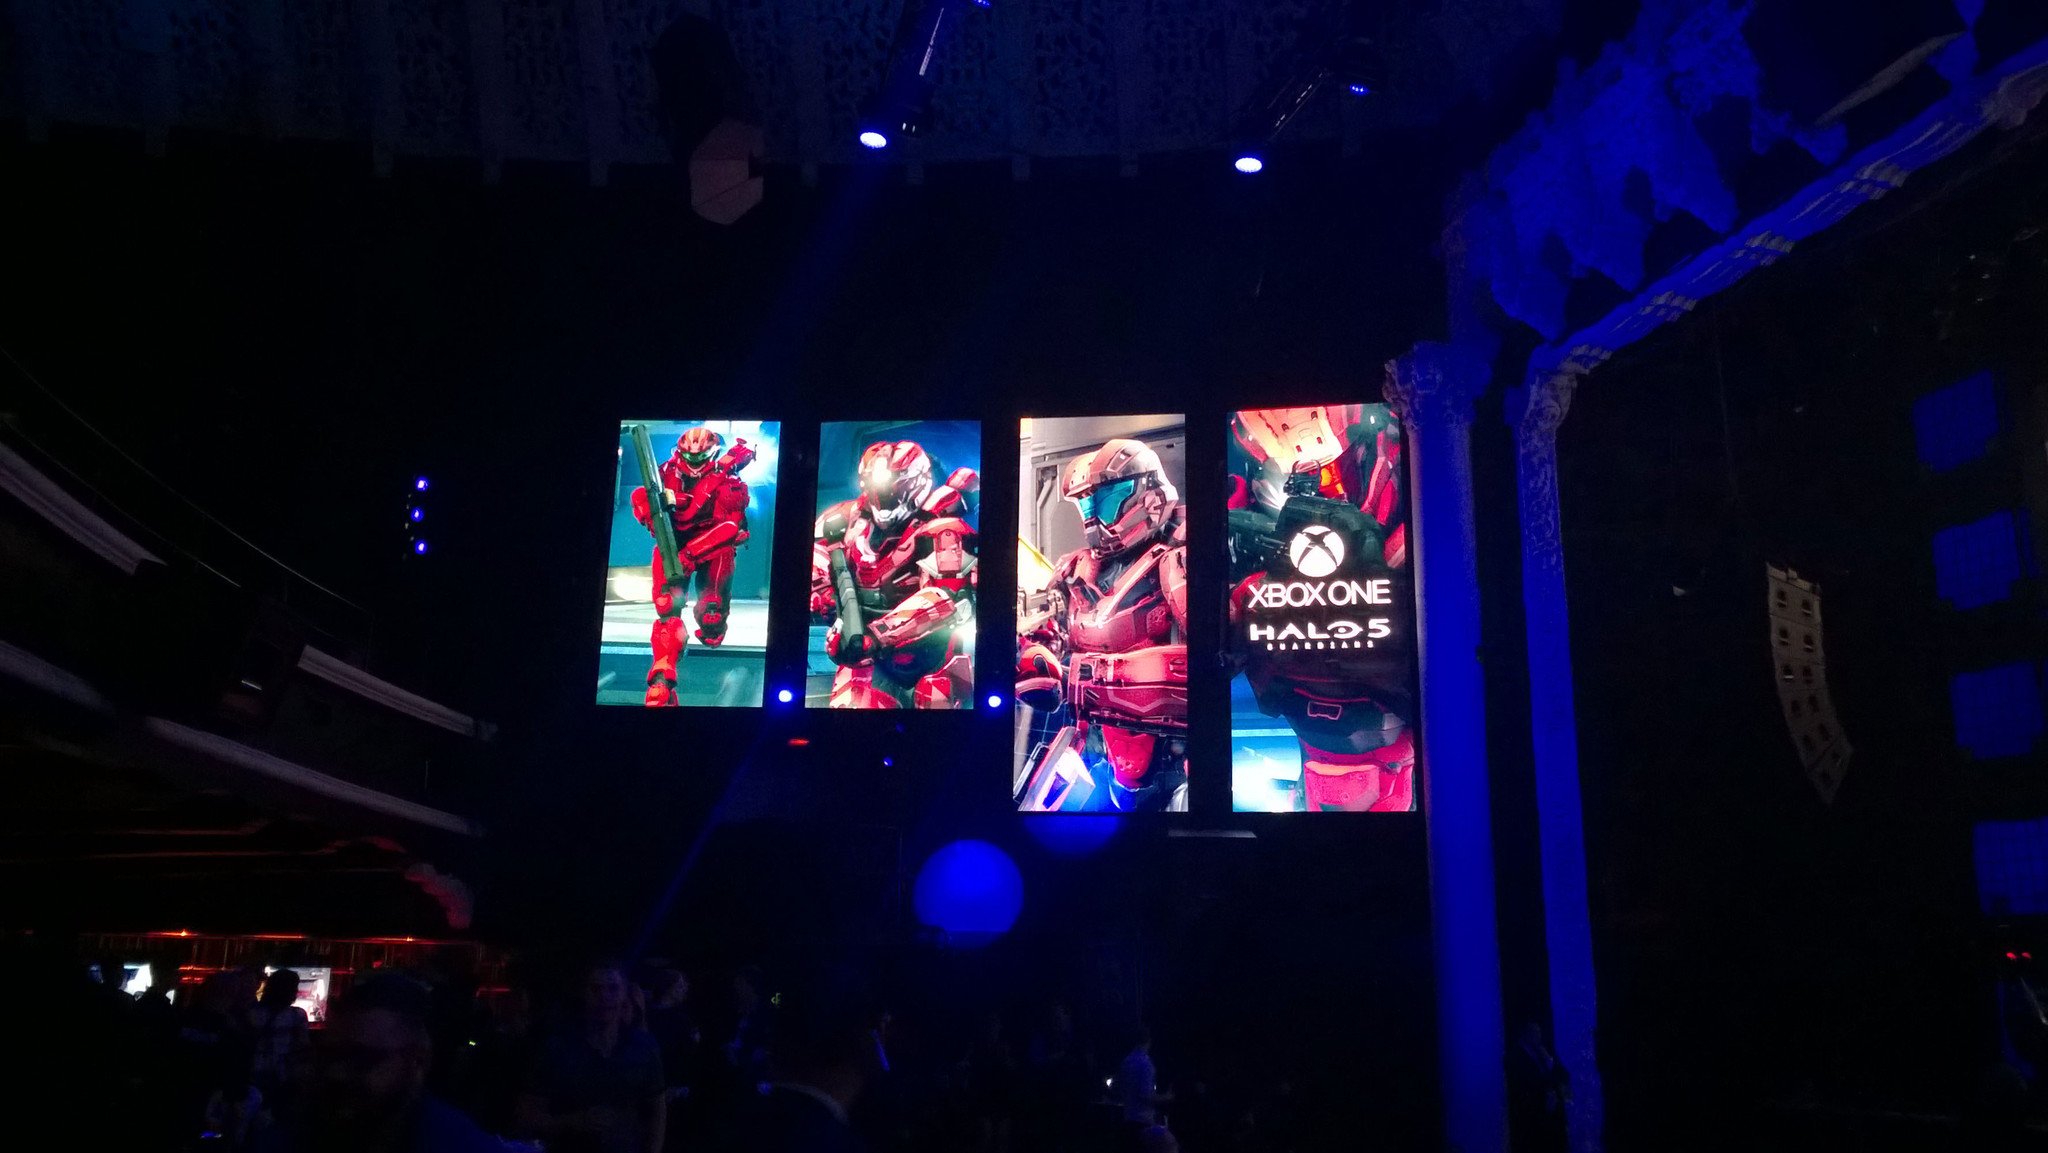 First impressions of Halo 5: Guardians multiplayer from HaloFest ...